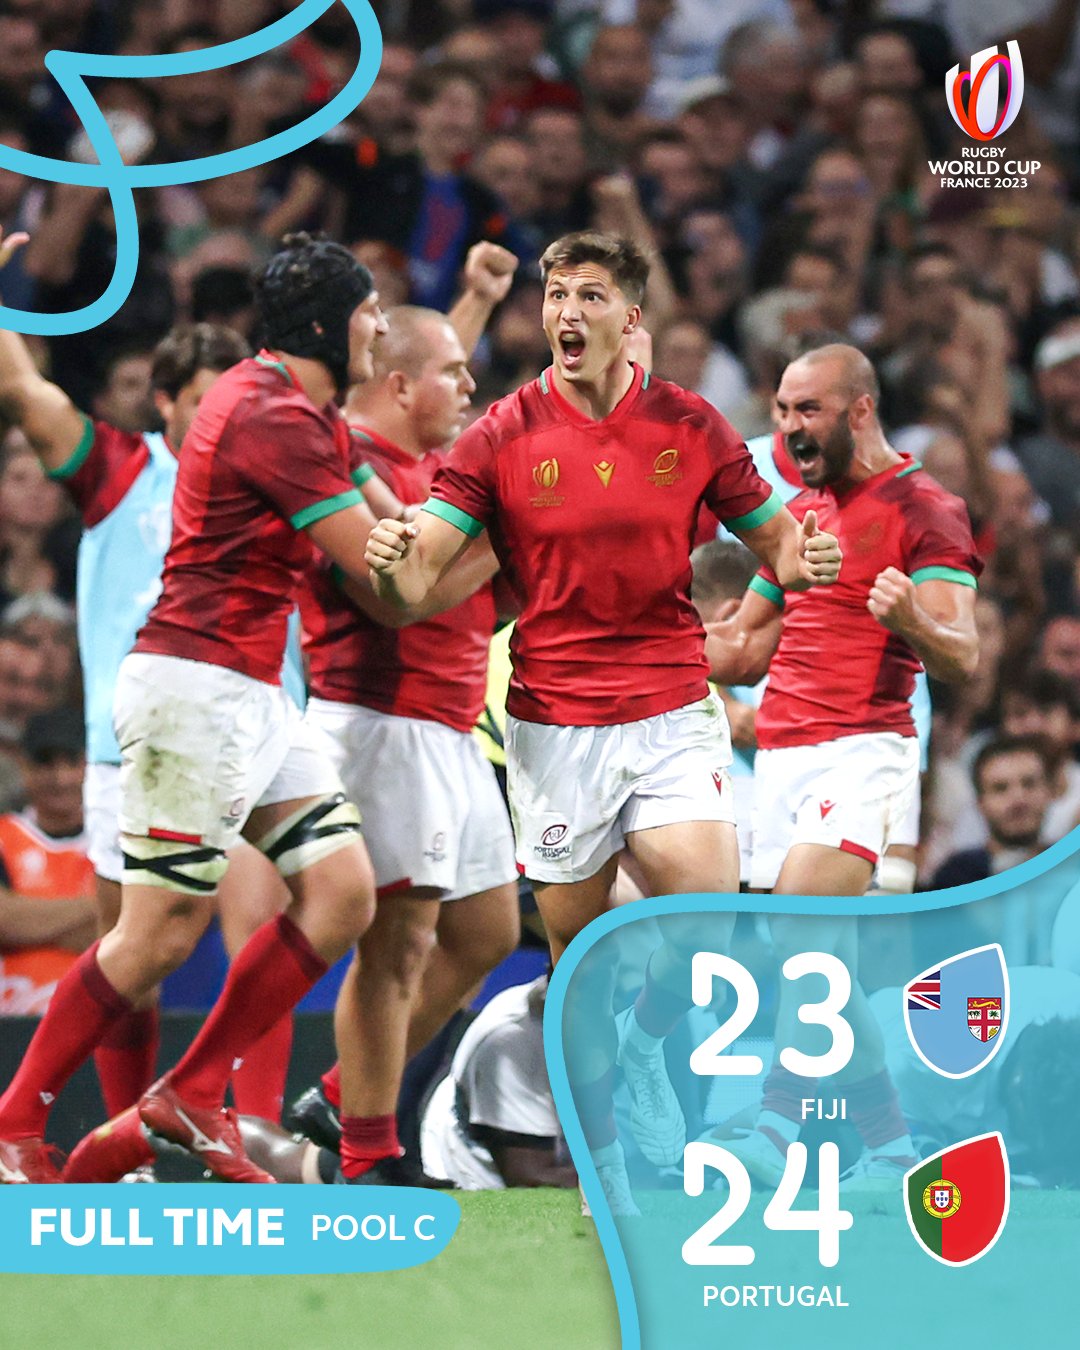 Portugal Rugby on X: ⏹ That was a great game 🥵😁 Thank you